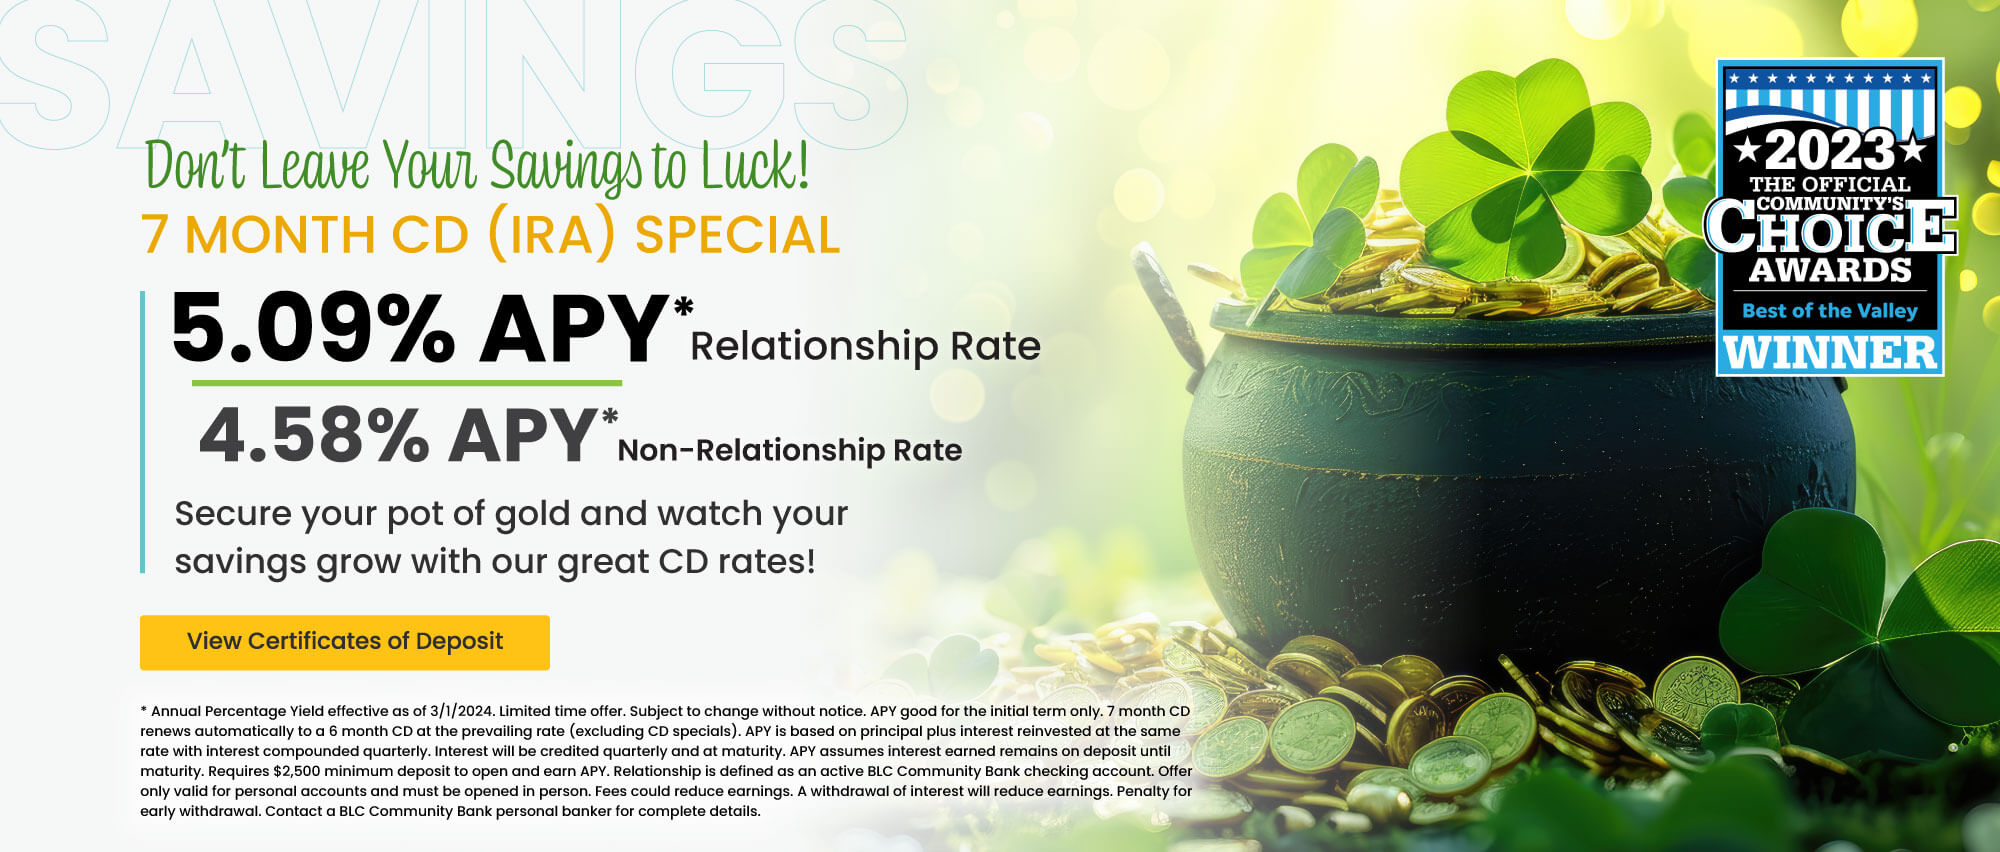 Don't leave your savings to luck. 7 month CD (IRA) 5.09% APY* relationship rate 4.58% apy* non-relationship rate.  View certificates of deposit for details. *annual percentage yield effective as of 11/1/2023. Limited time offer. Subject to change without notice. APY good for the initial term only. 7 month cd renews automatically to a 6 month cd at the prevailing rate (excluding cd specials). apy is based on principal plus interest reinvested at the same rate with interest compounded quarterly. Interest will be credited quarterly and at maturity. apy assumes interest earned remains on deposit until maturity. requires $2,500 minimum deposit to open and earn apy. Relationship is defined as an active blc community bank checking account. offer only valid for personal accounts and must be opened in person. Fees could reduce earning. A withdrawal of interest will reduce earnings. Penalty for early withdrawal. Contact a blc community bank personal banker for complete details.